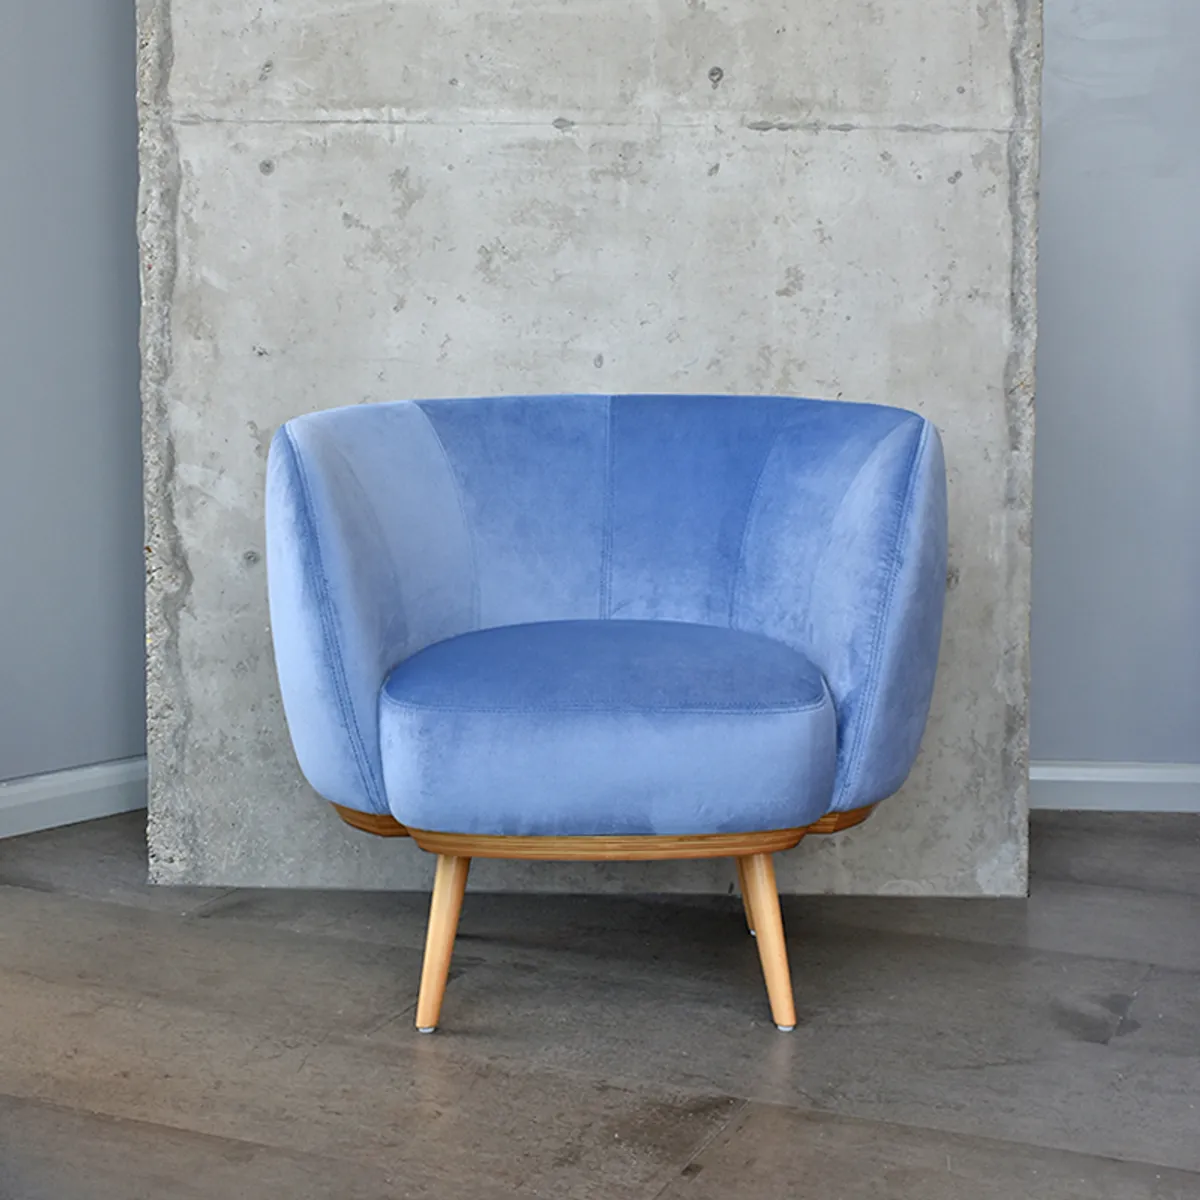 Cosmo Lounge Chair New Furniture From Milan 2019 By Inside Out Contracts 030